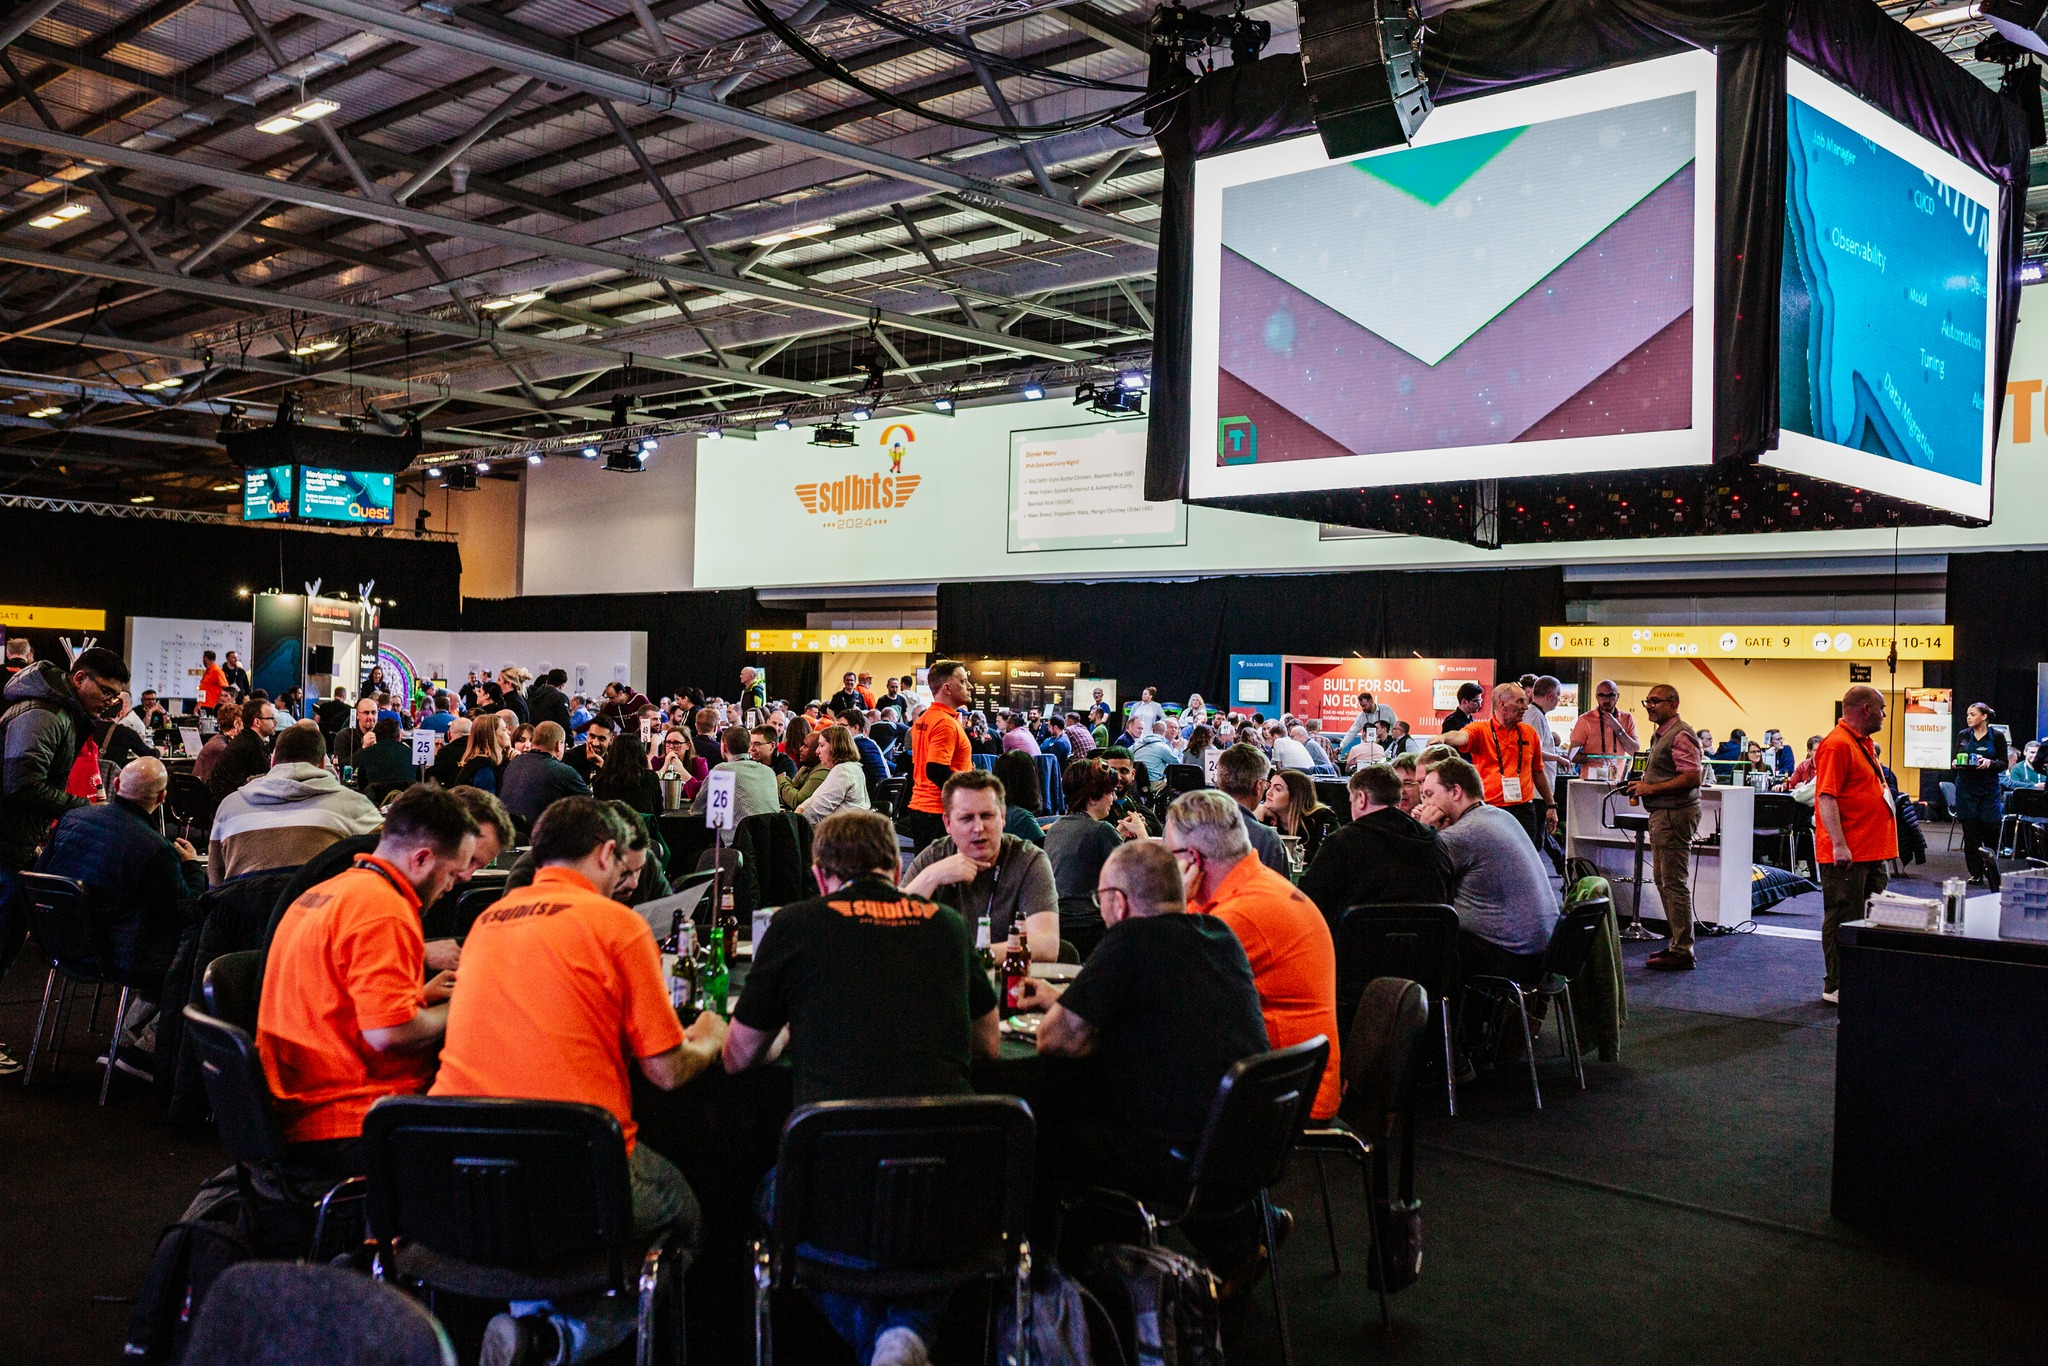 An image of the SqlBits quiz